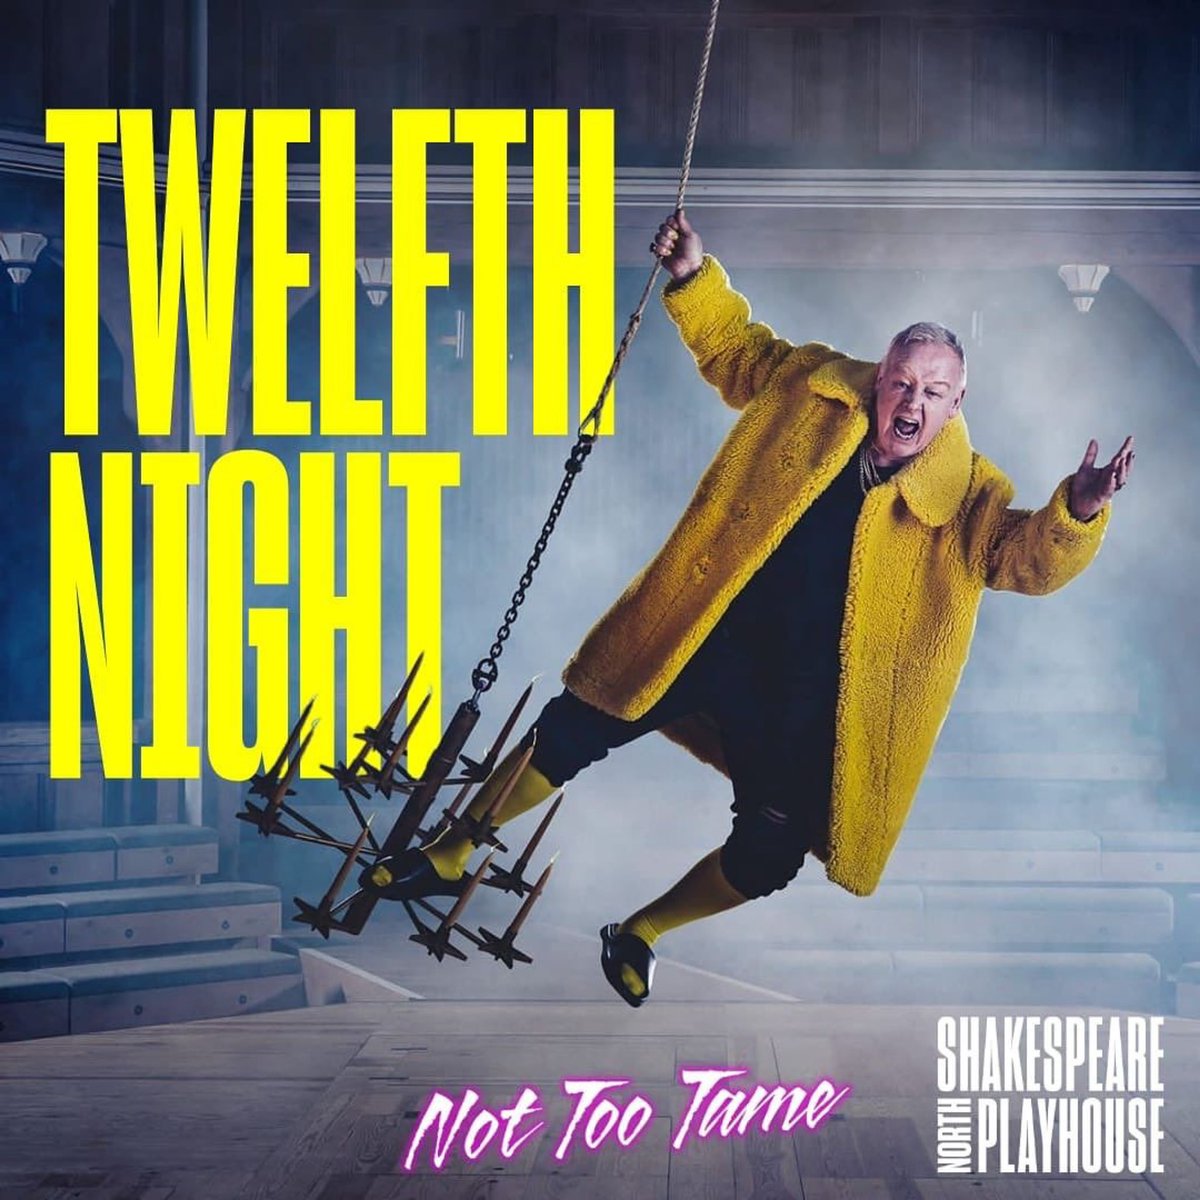 SWITCH YOUR TELLY TO @SundayBrunchC4 to see the legend @LesDennis talking all things #TwelfthNight Les will be playing Malvolio in the raucous, riff filled co production between @nottootame & @ShakespeareNP directed by @jimmy_fairhurst 7-29 June 🎟️ bit.ly/4aUHcds